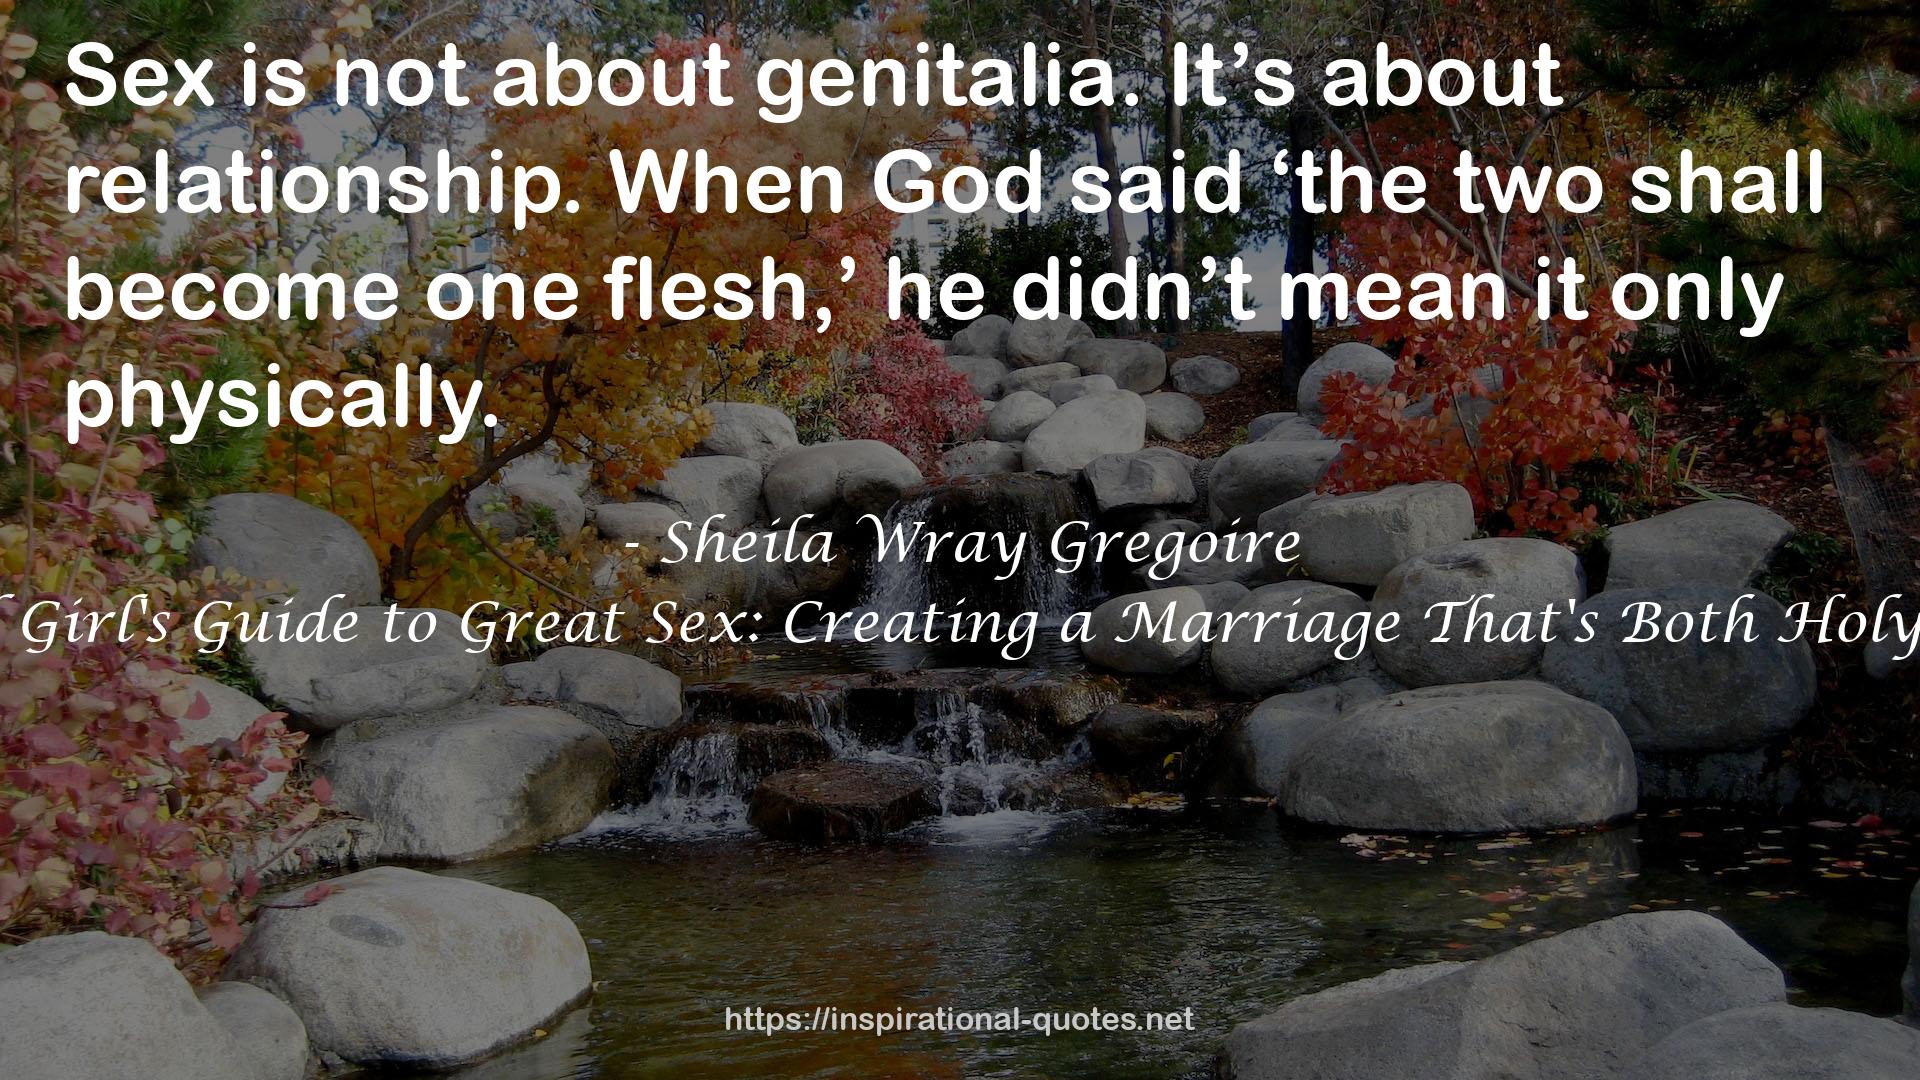 The Good Girl's Guide to Great Sex: Creating a Marriage That's Both Holy and Hot QUOTES